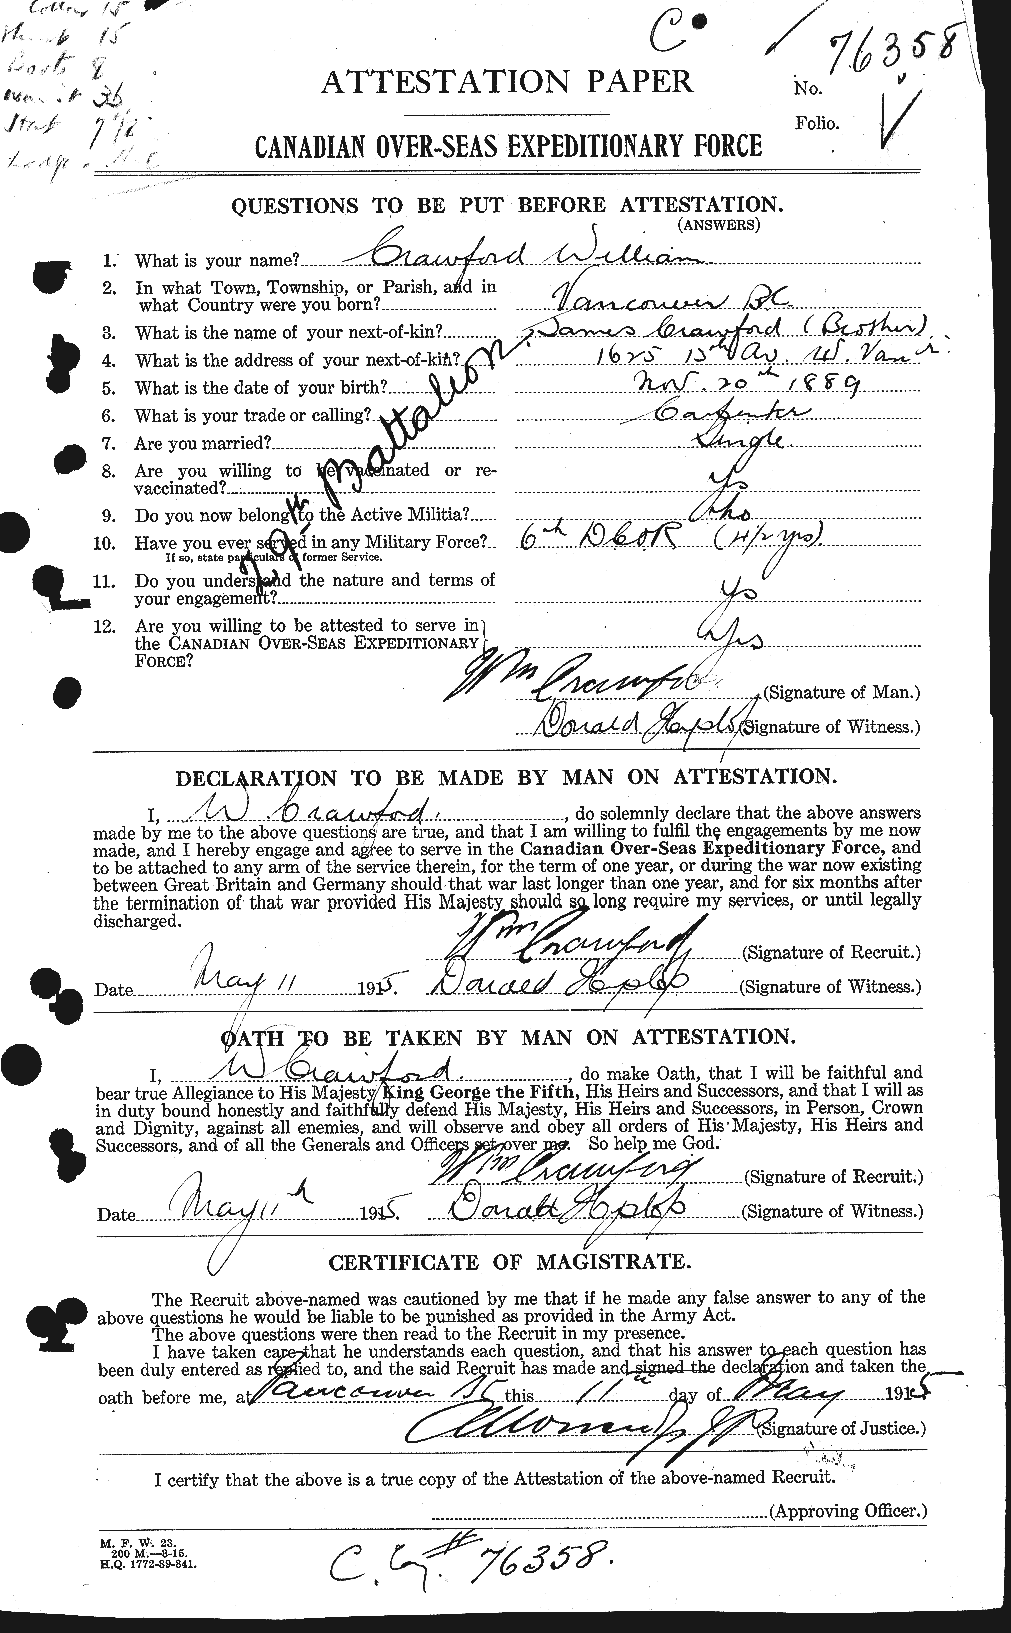 Personnel Records of the First World War - CEF 061167a